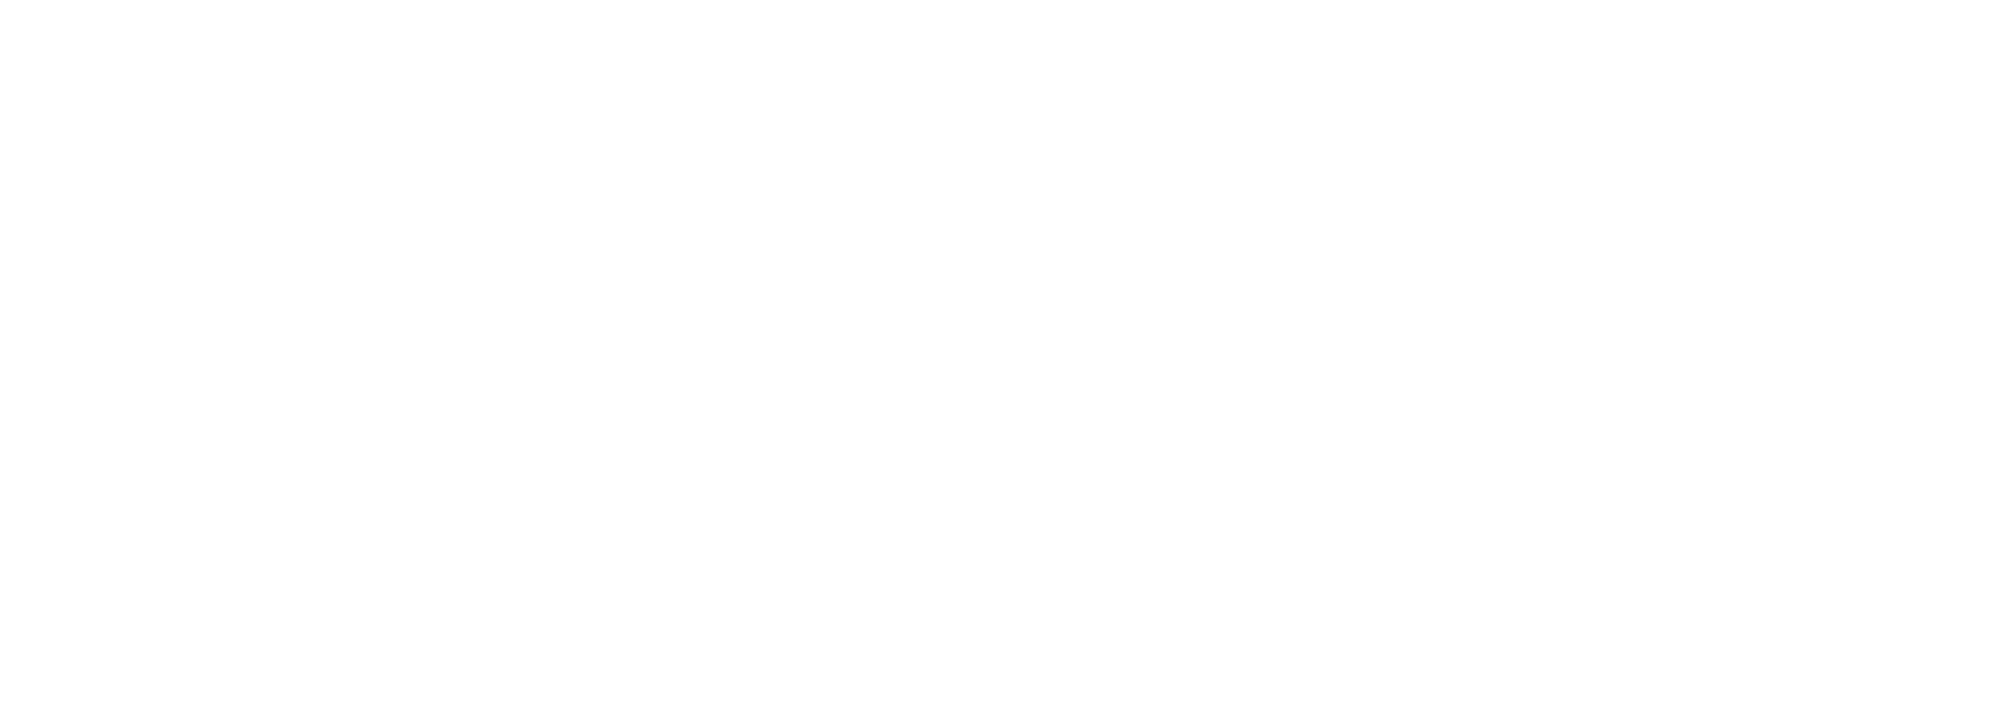 peo-guide-icon-pattern